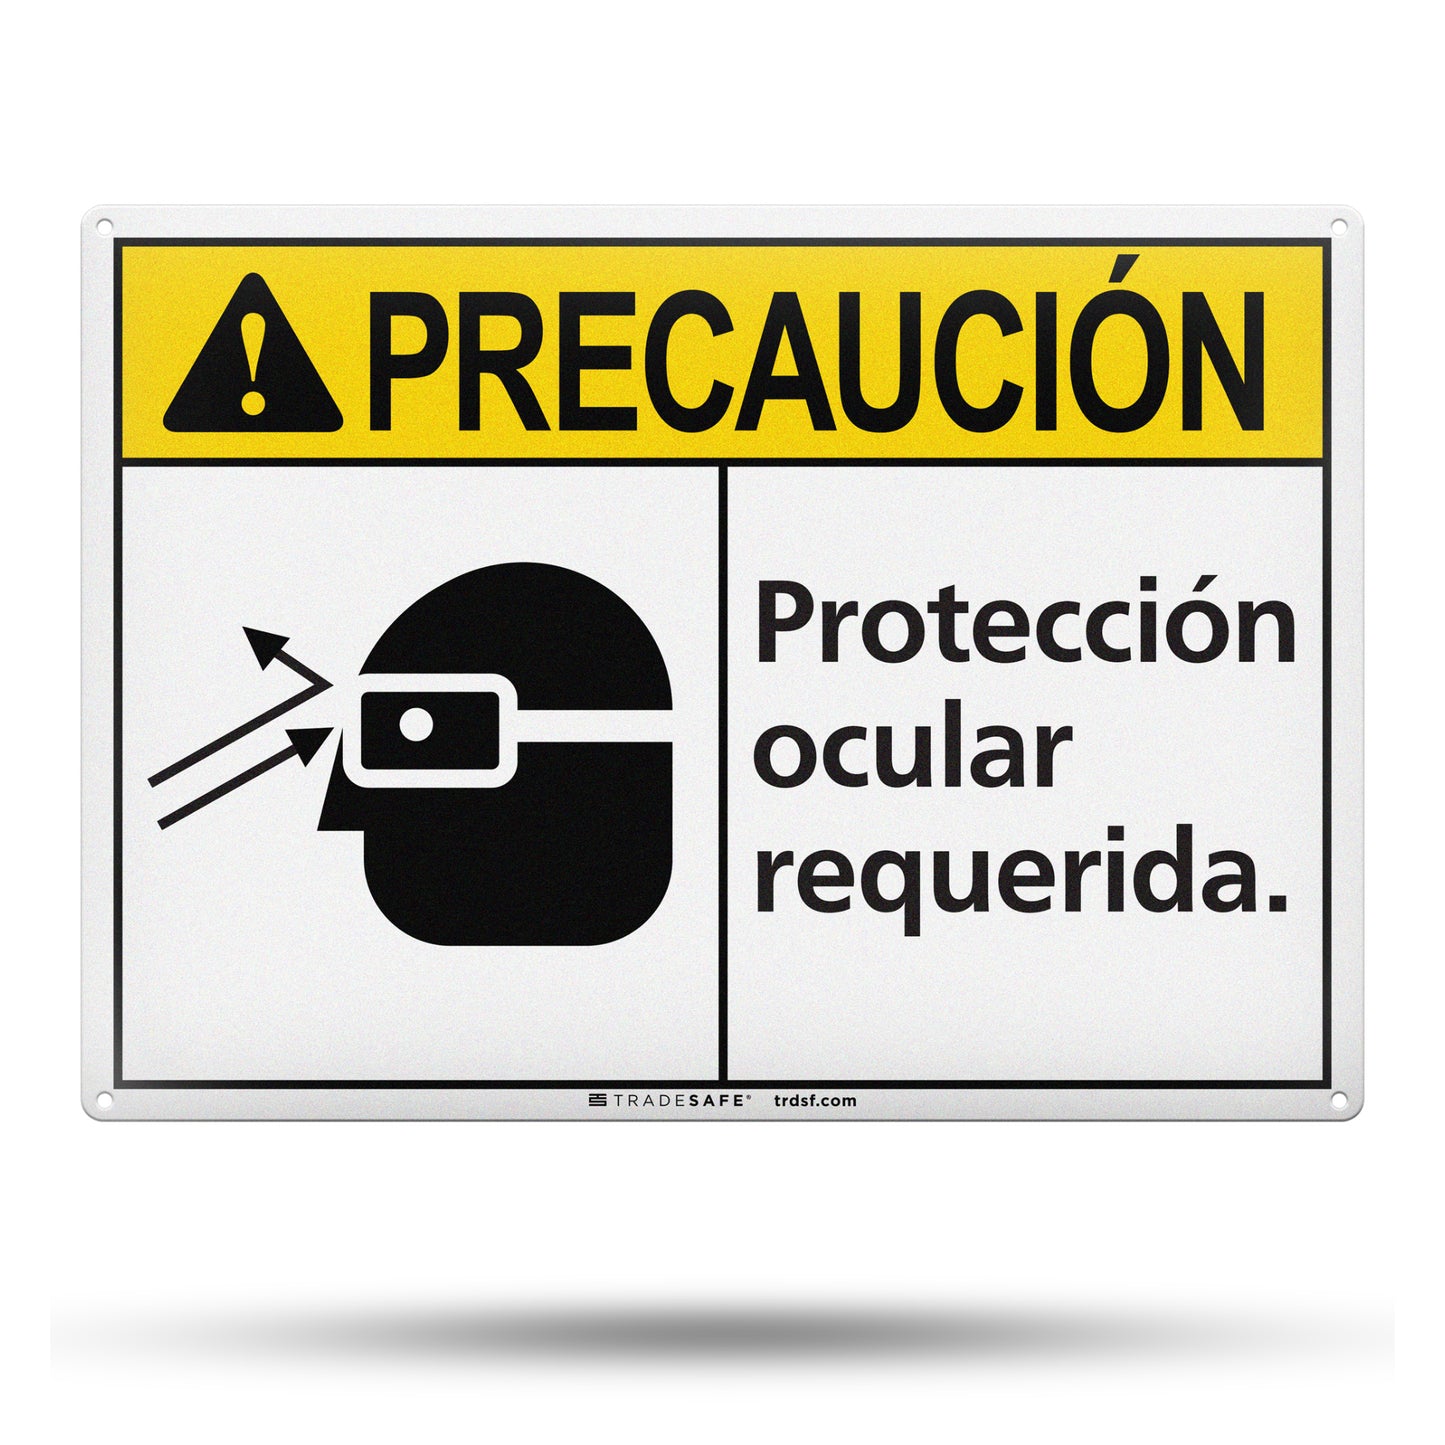 eye protection required sign in spanish